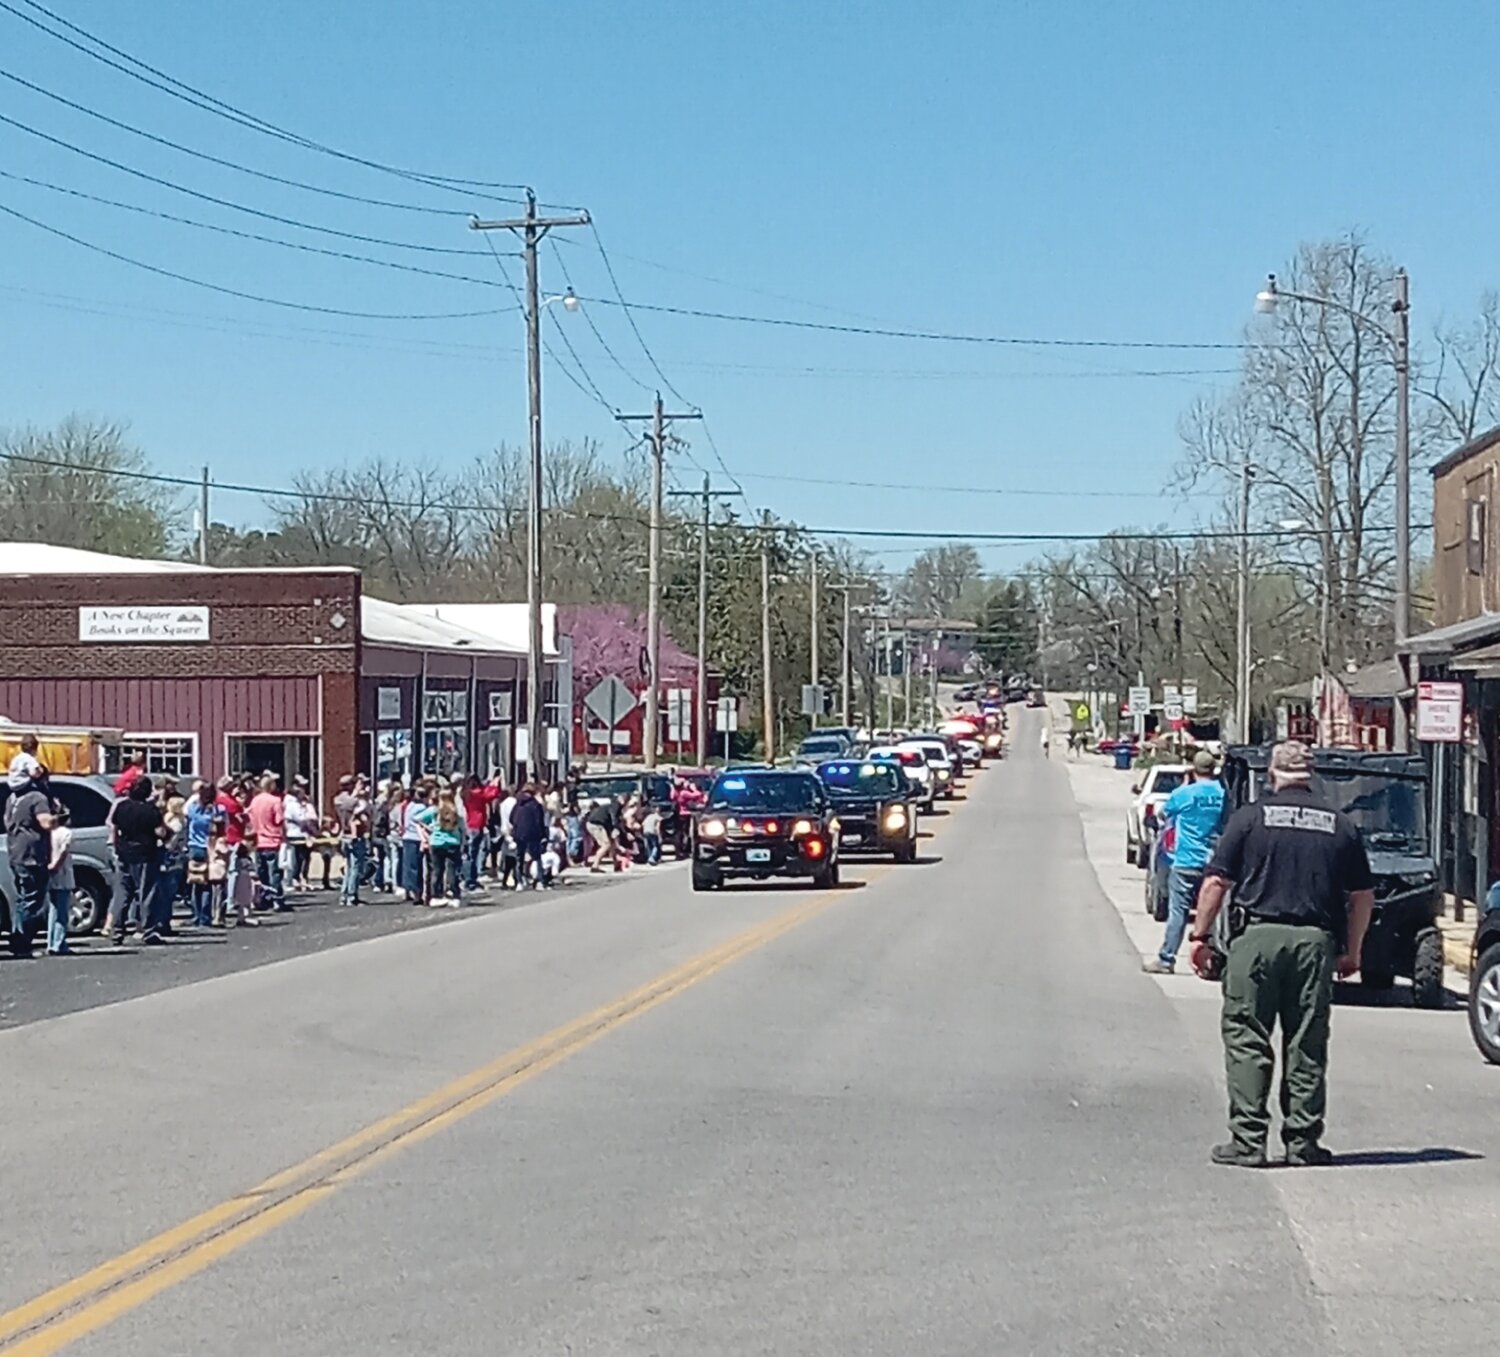 A First Responder Parade makes its way toward the square in Mansfield. The parade was held as a part of this year’s “Bark in the Park” fundraiser.